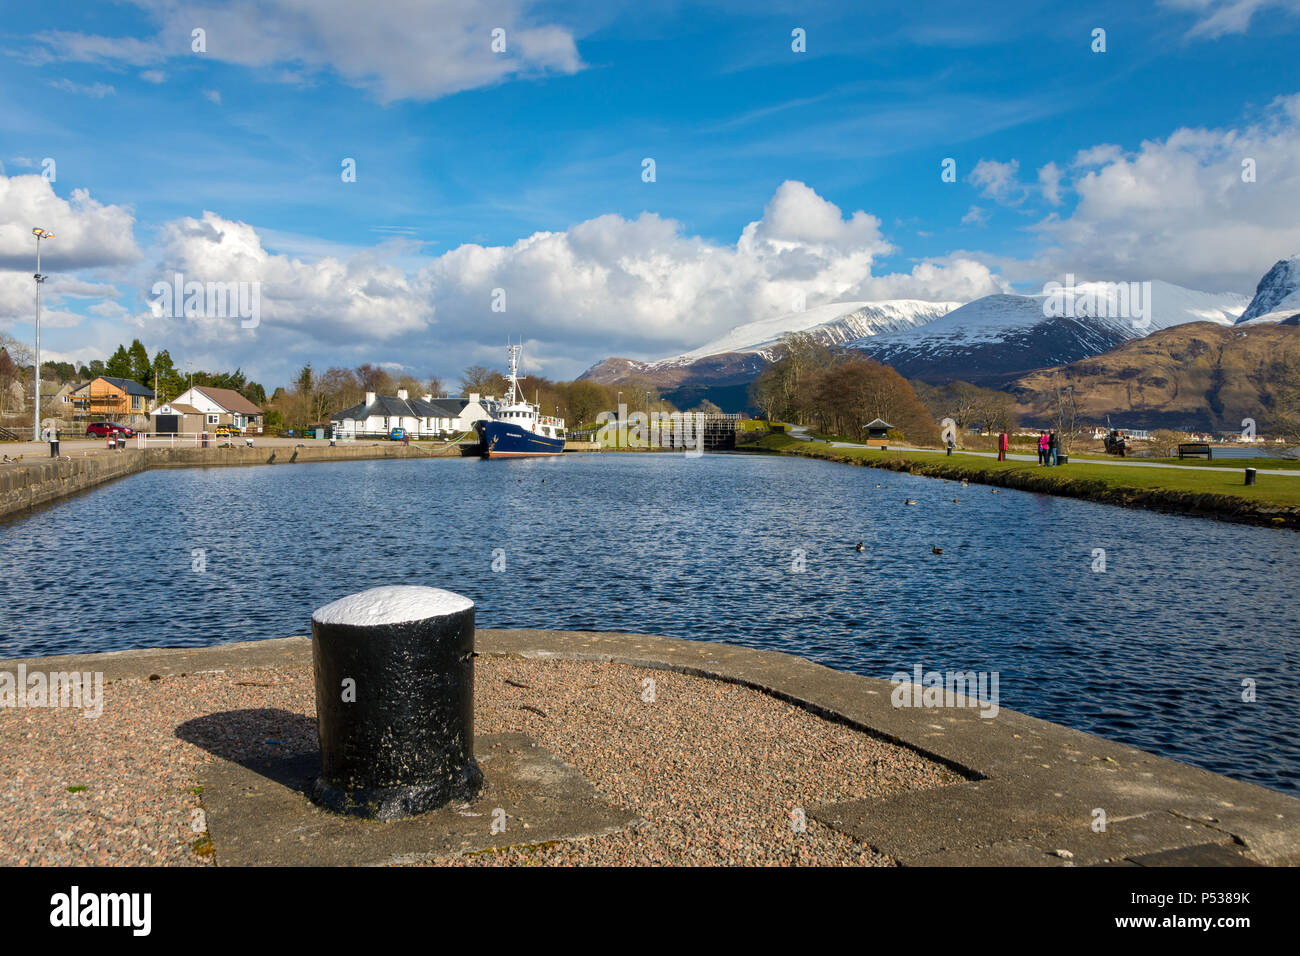 The Caledonian Canal at Corpach near Fort William, Highland Region, Scotland, UK.  The boat is the Elizabeth G. Stock Photo